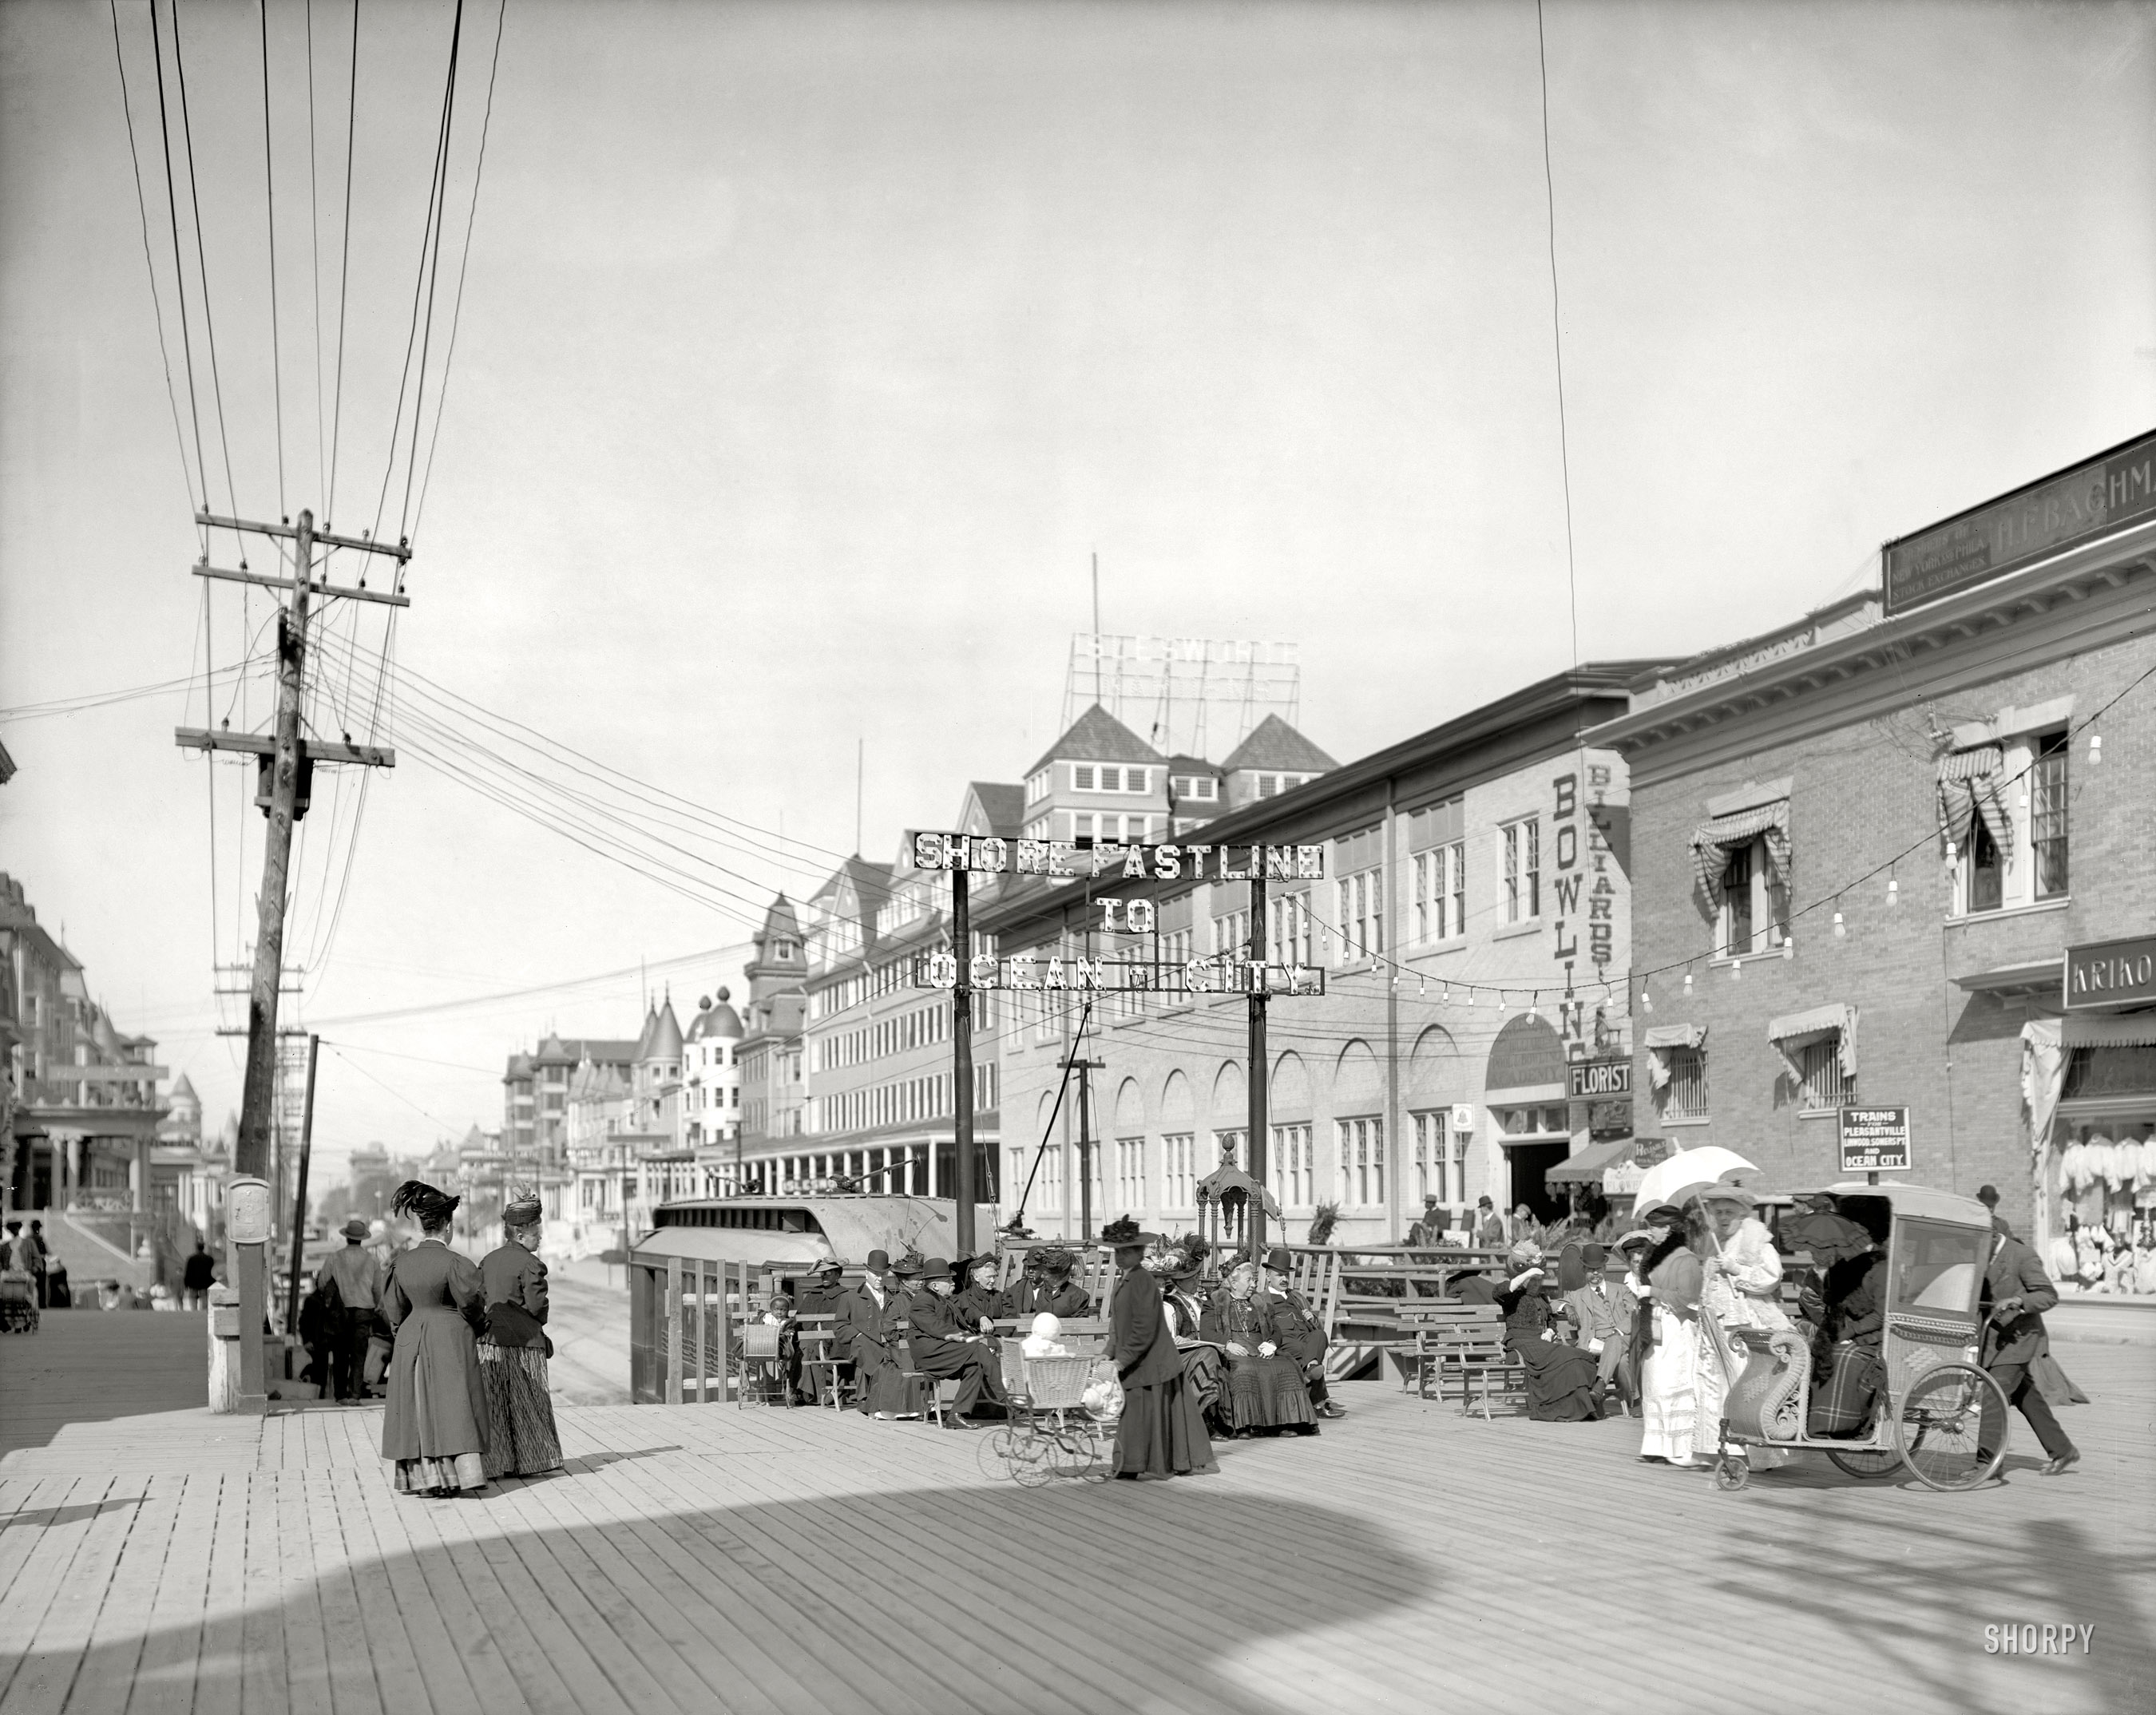 Atlantic City circa 1908. "Virginia Avenue from the Boardwalk." 8x10 inch dry plate glass negative, Detroit Publishing Company. View full size.